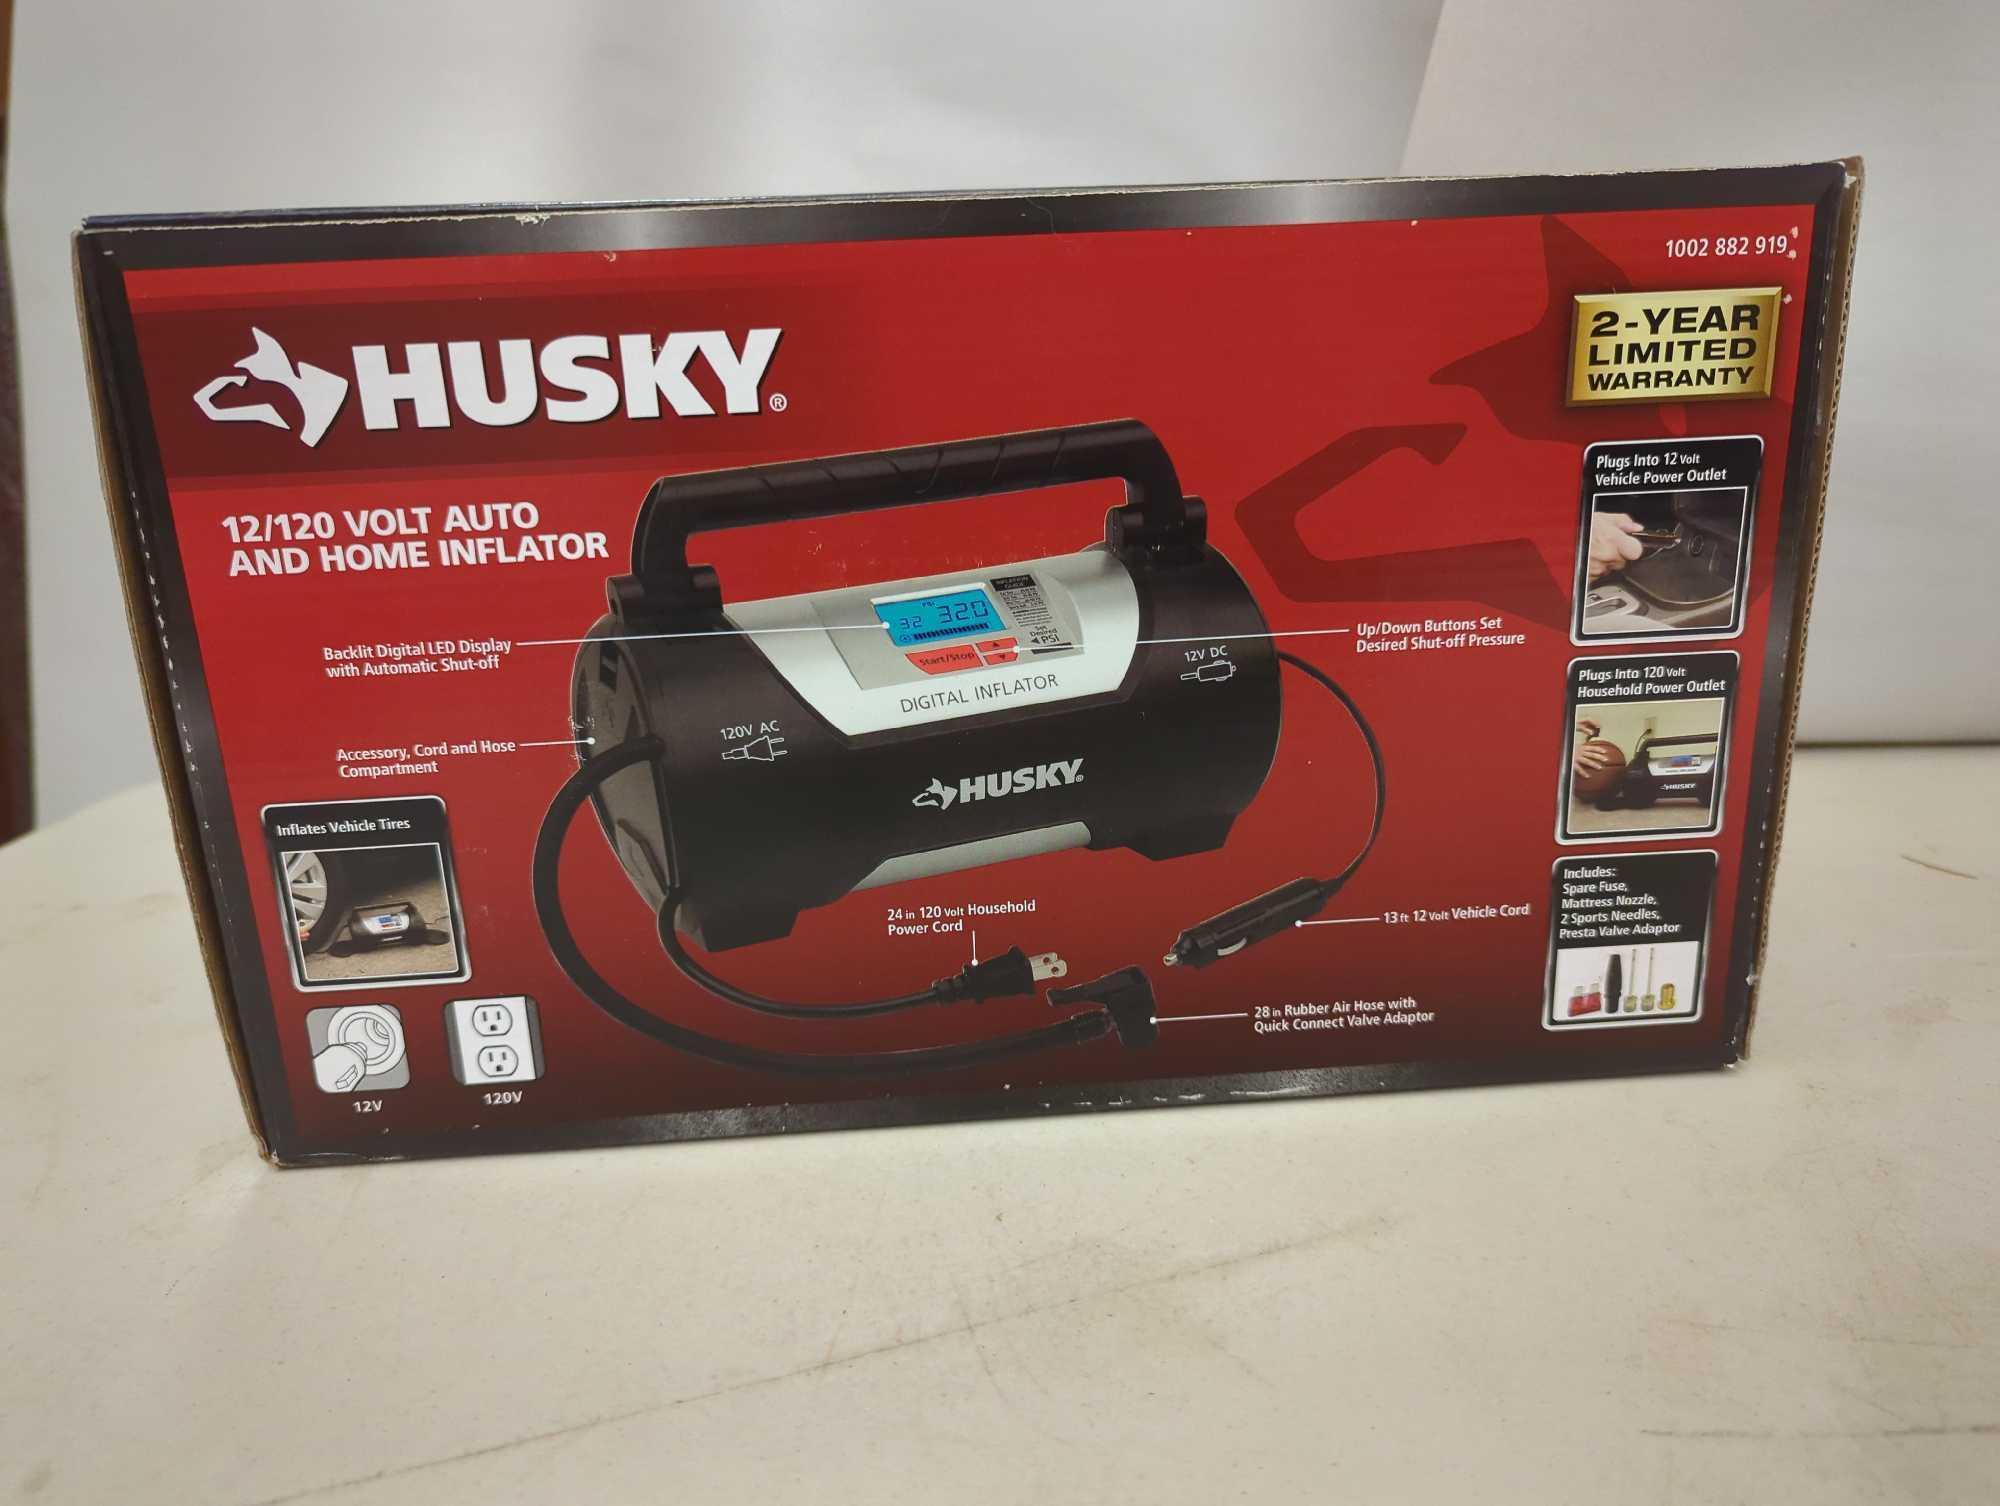 Husky 12/120 Volt Corded Electric Auto and Home Inflator. Comes in open box as is shown in photos.